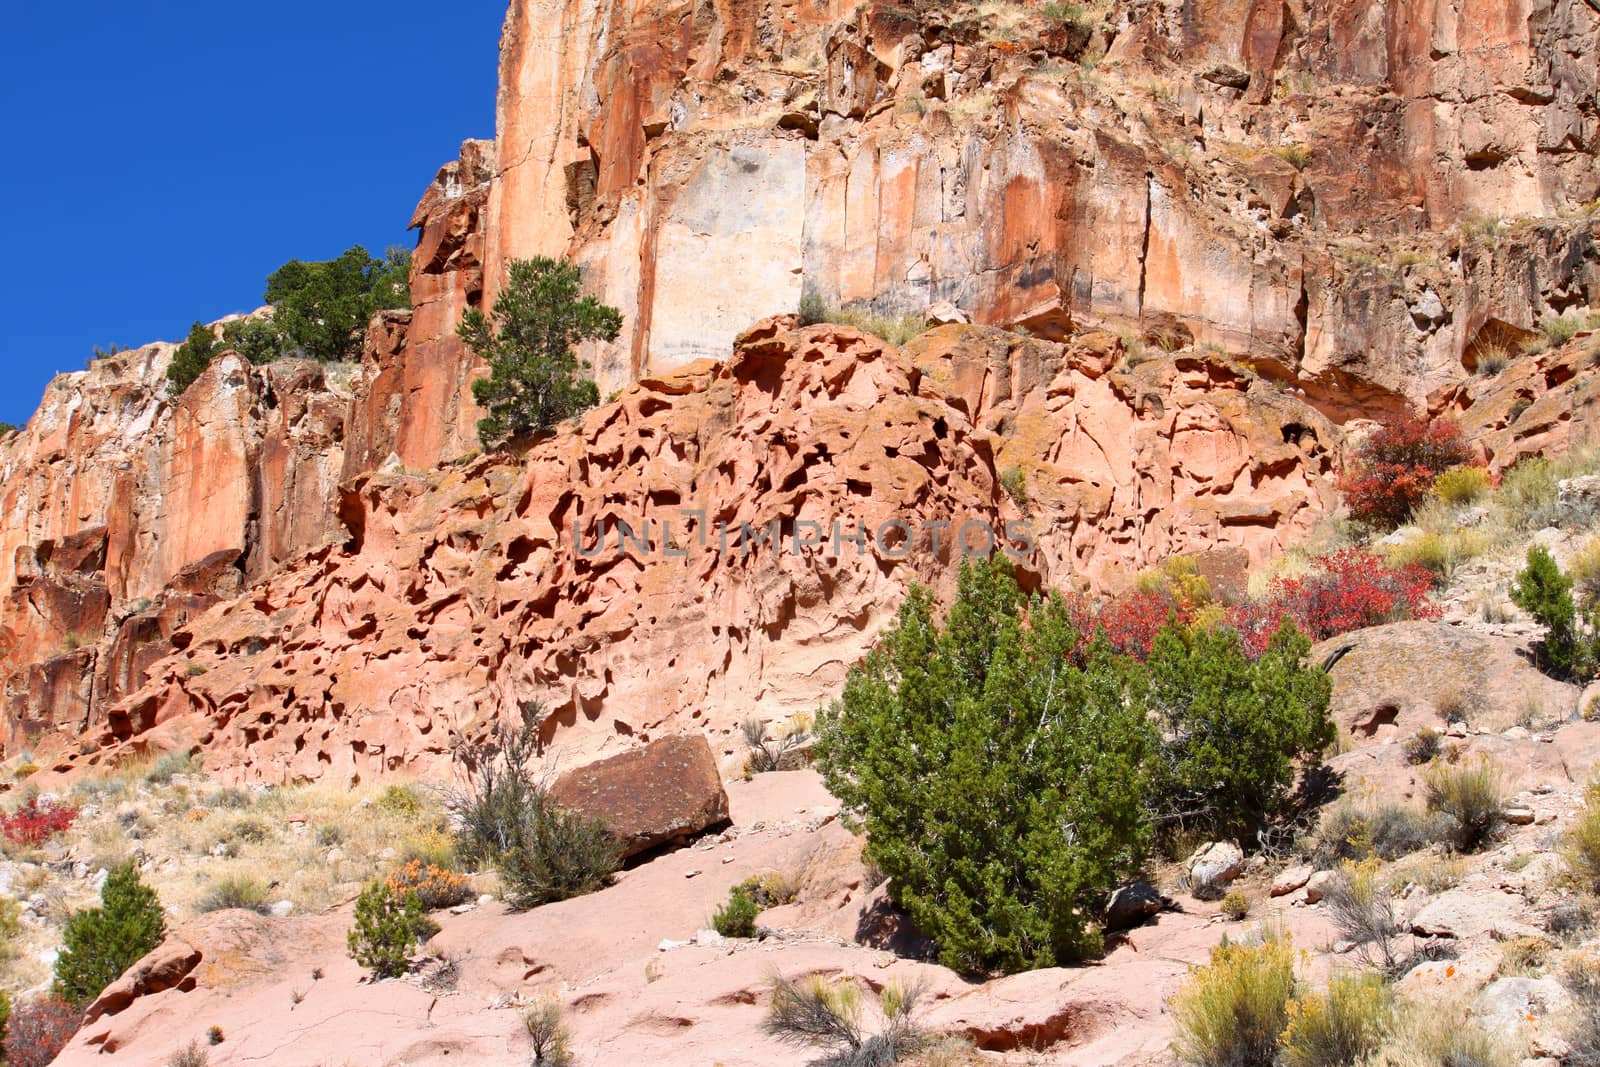 Geological features of Fremont Indian State Park in Utah.